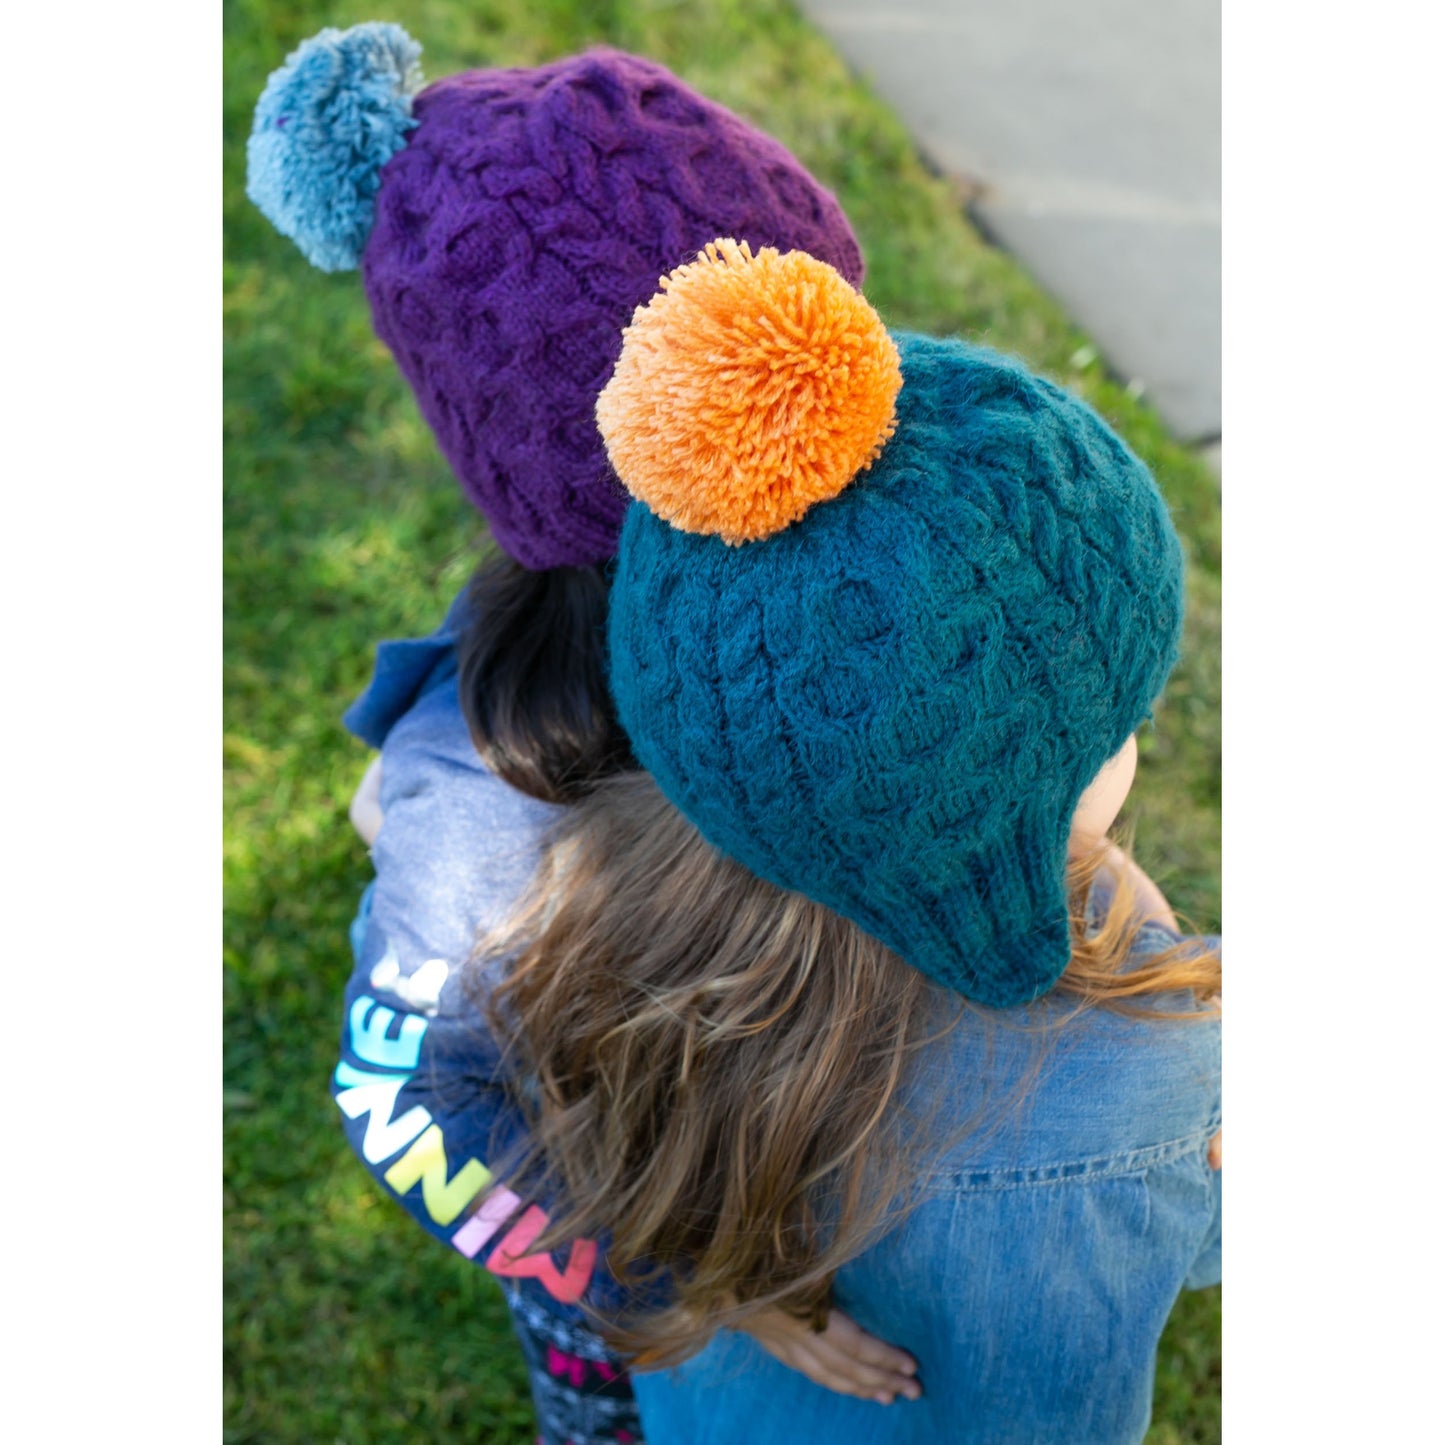 Kids with Purple and Blue Cable Hats